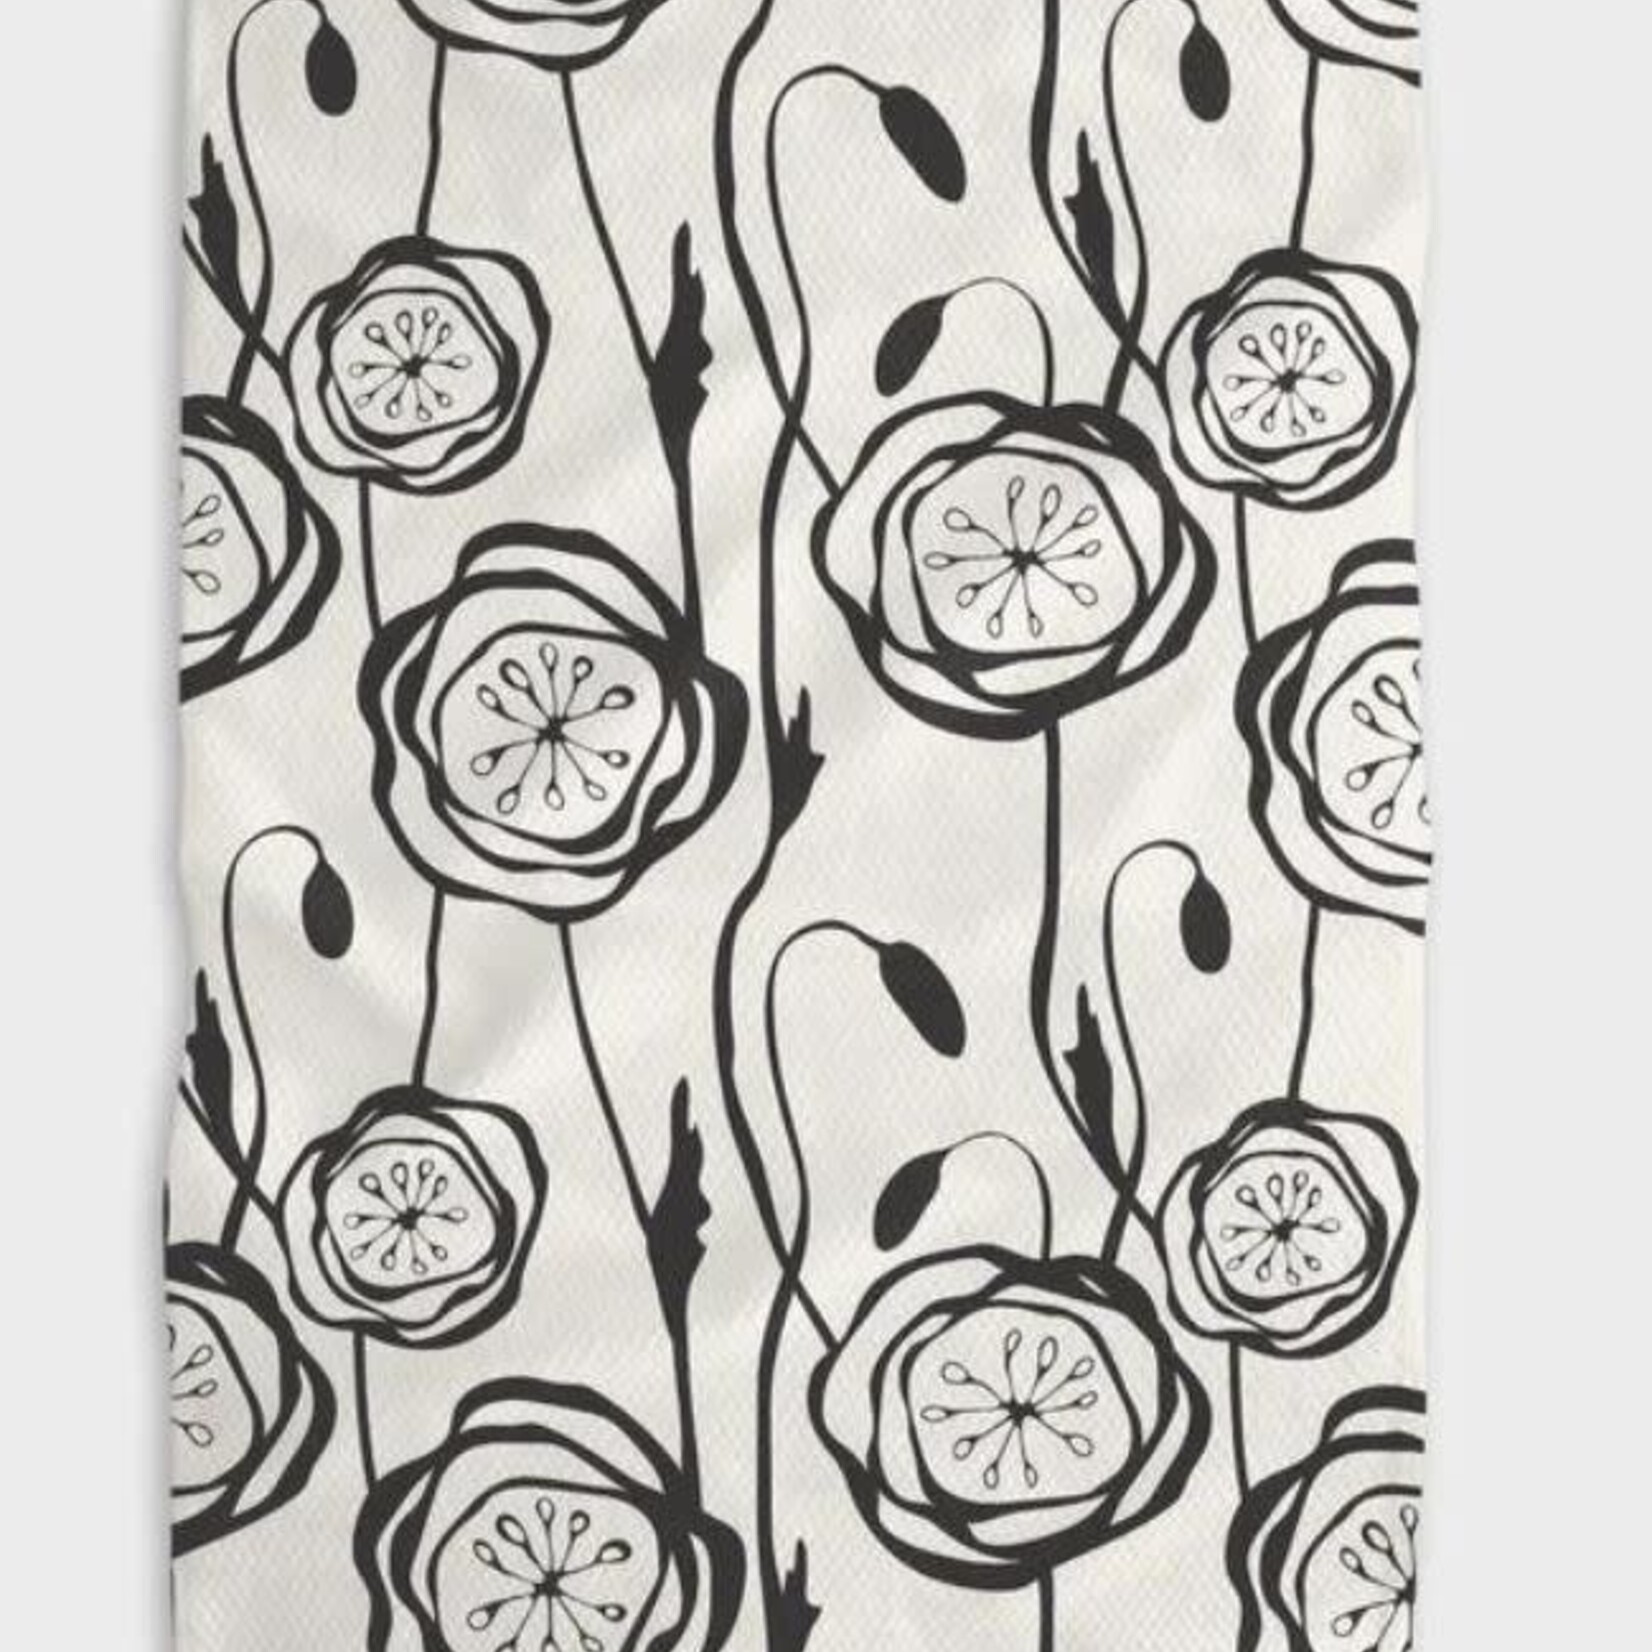 Geometry House Smell The Flowers Kitchen Tea Towel